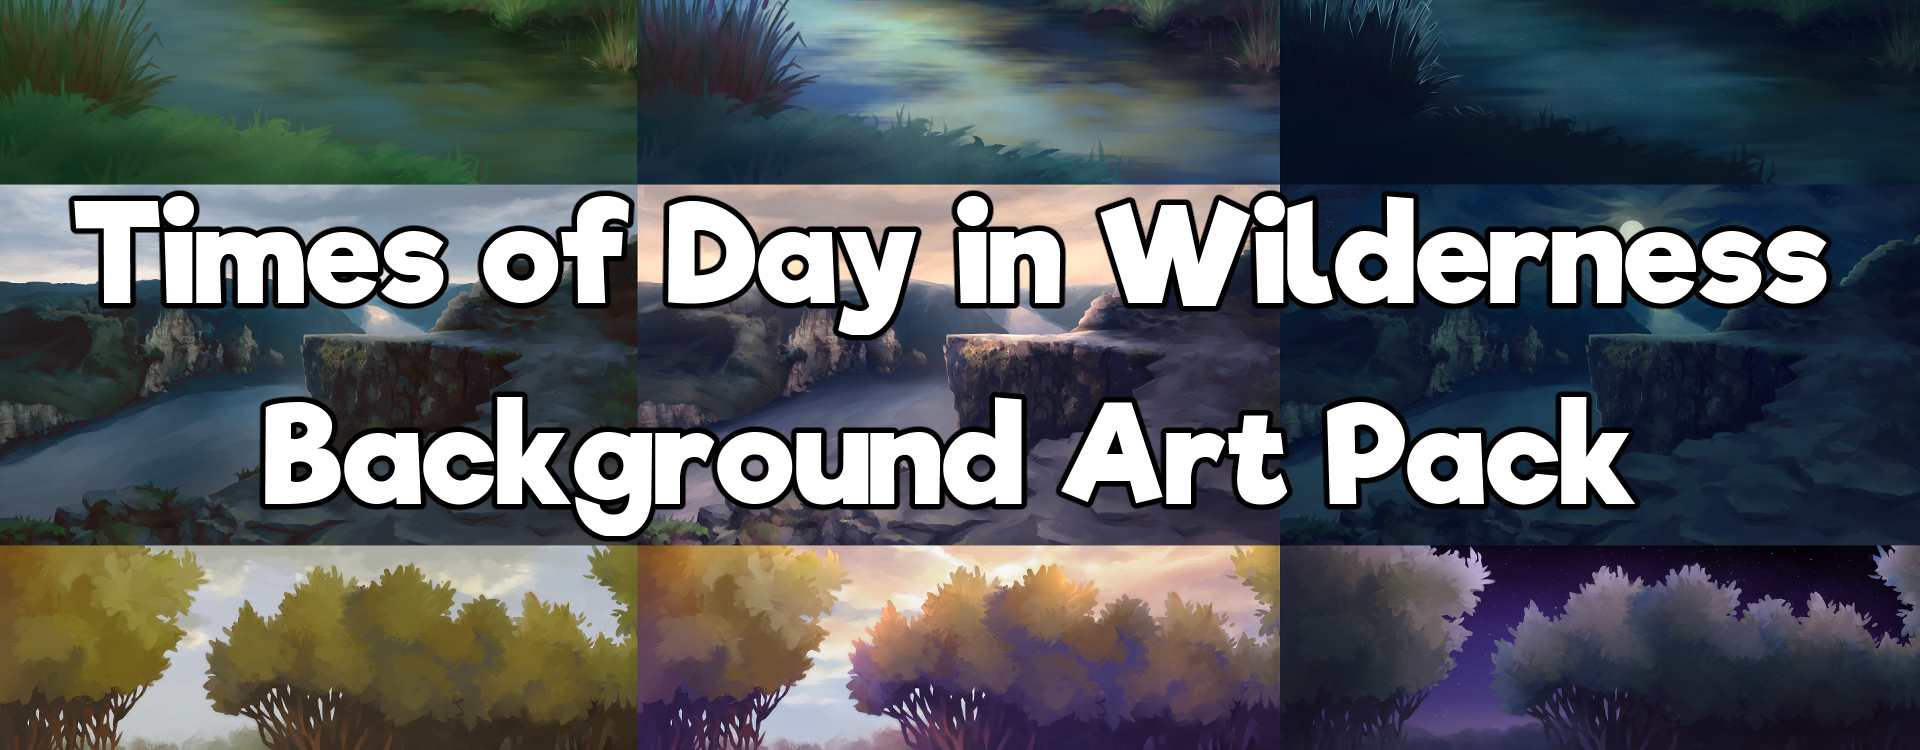 Times of Day in Wilderness Background Art Pack